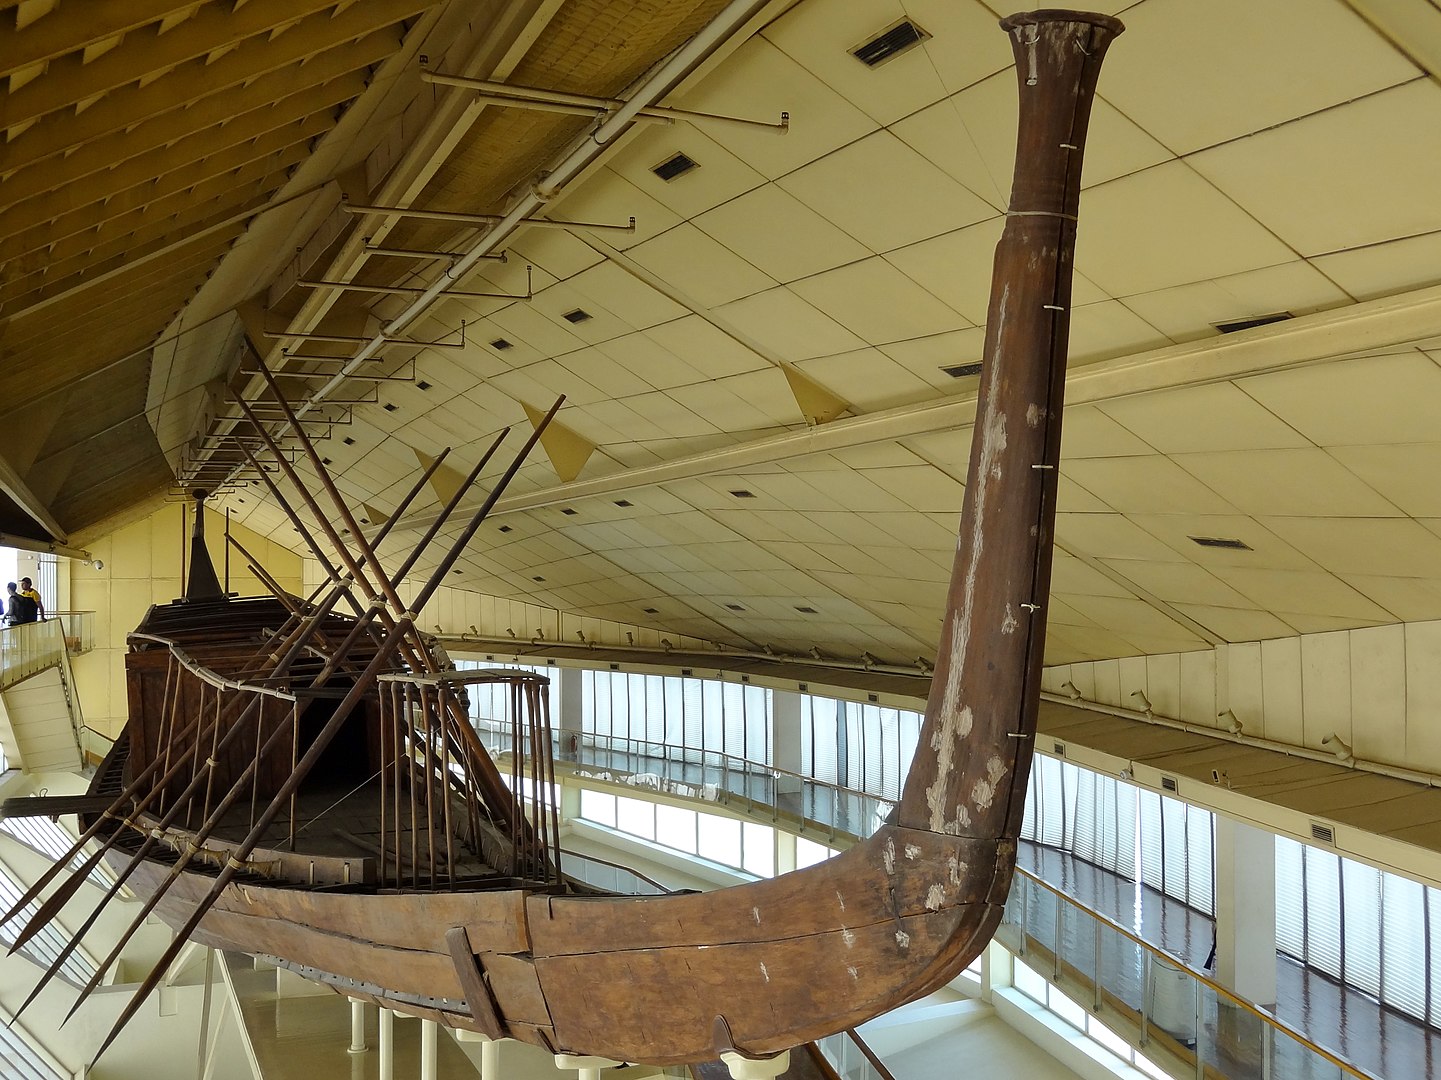 The Khufu ship as it used to be displayed (Roland Unger/CC BY-SA 3.0)